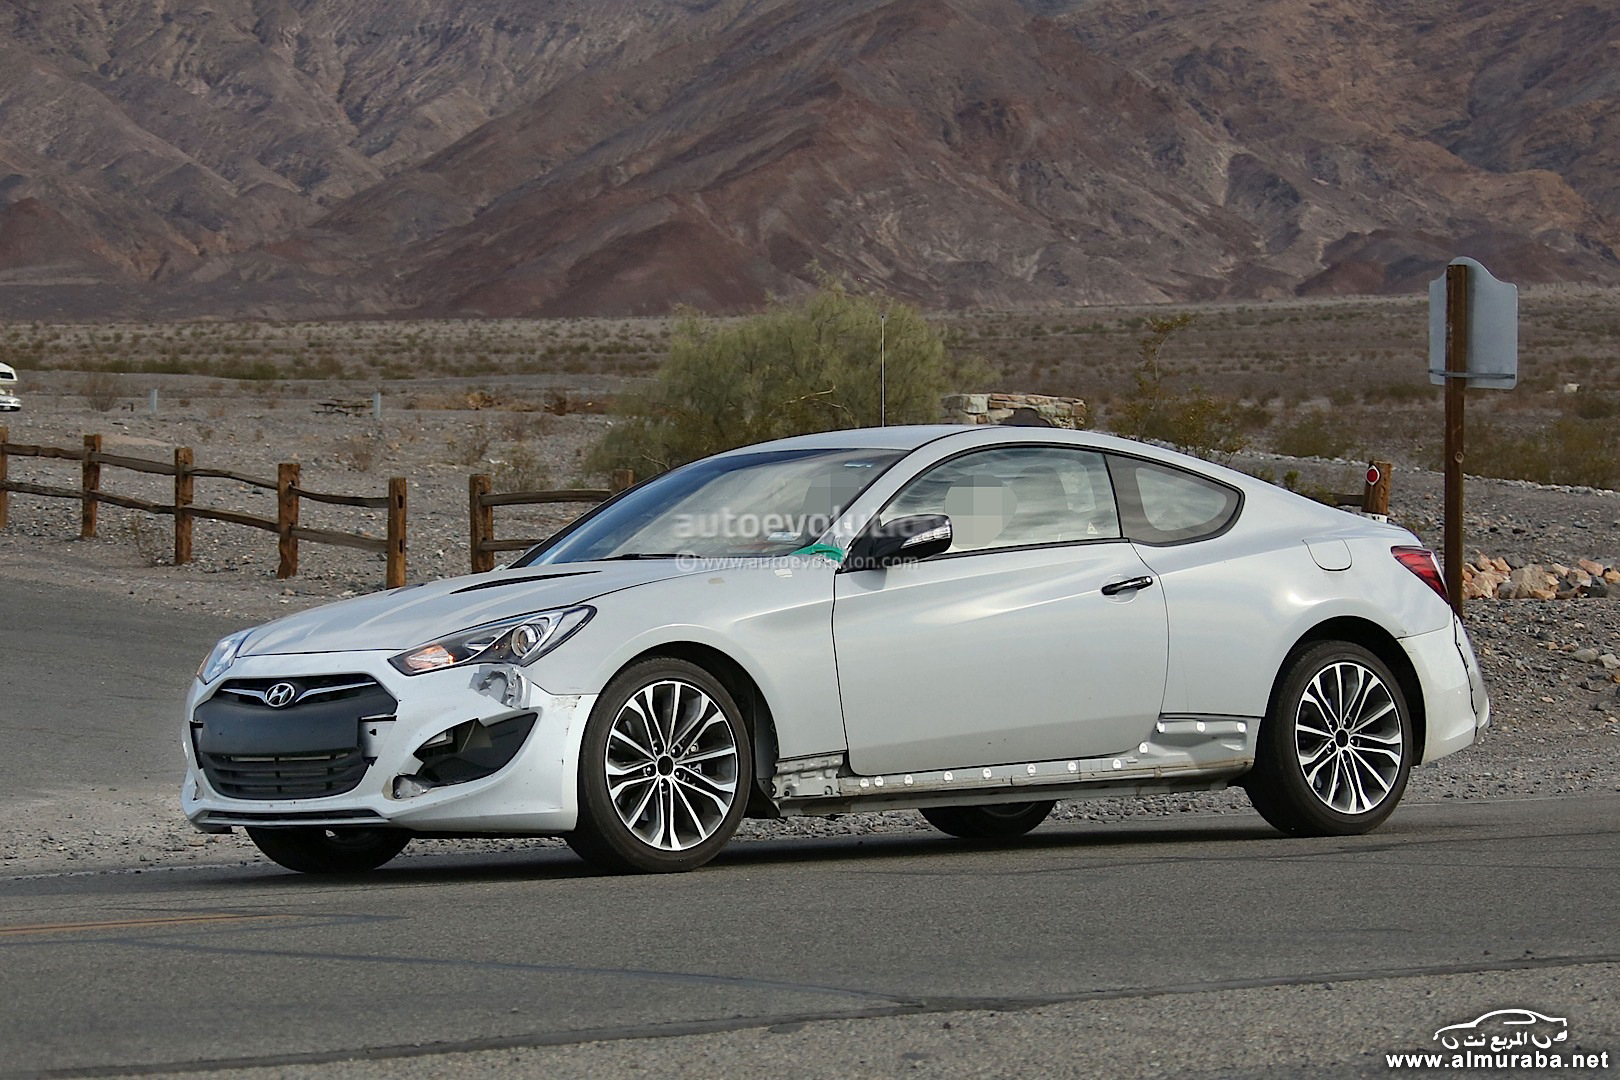 new-2017-hyundai-genesis-coupe-spied-for-the-first-time_6